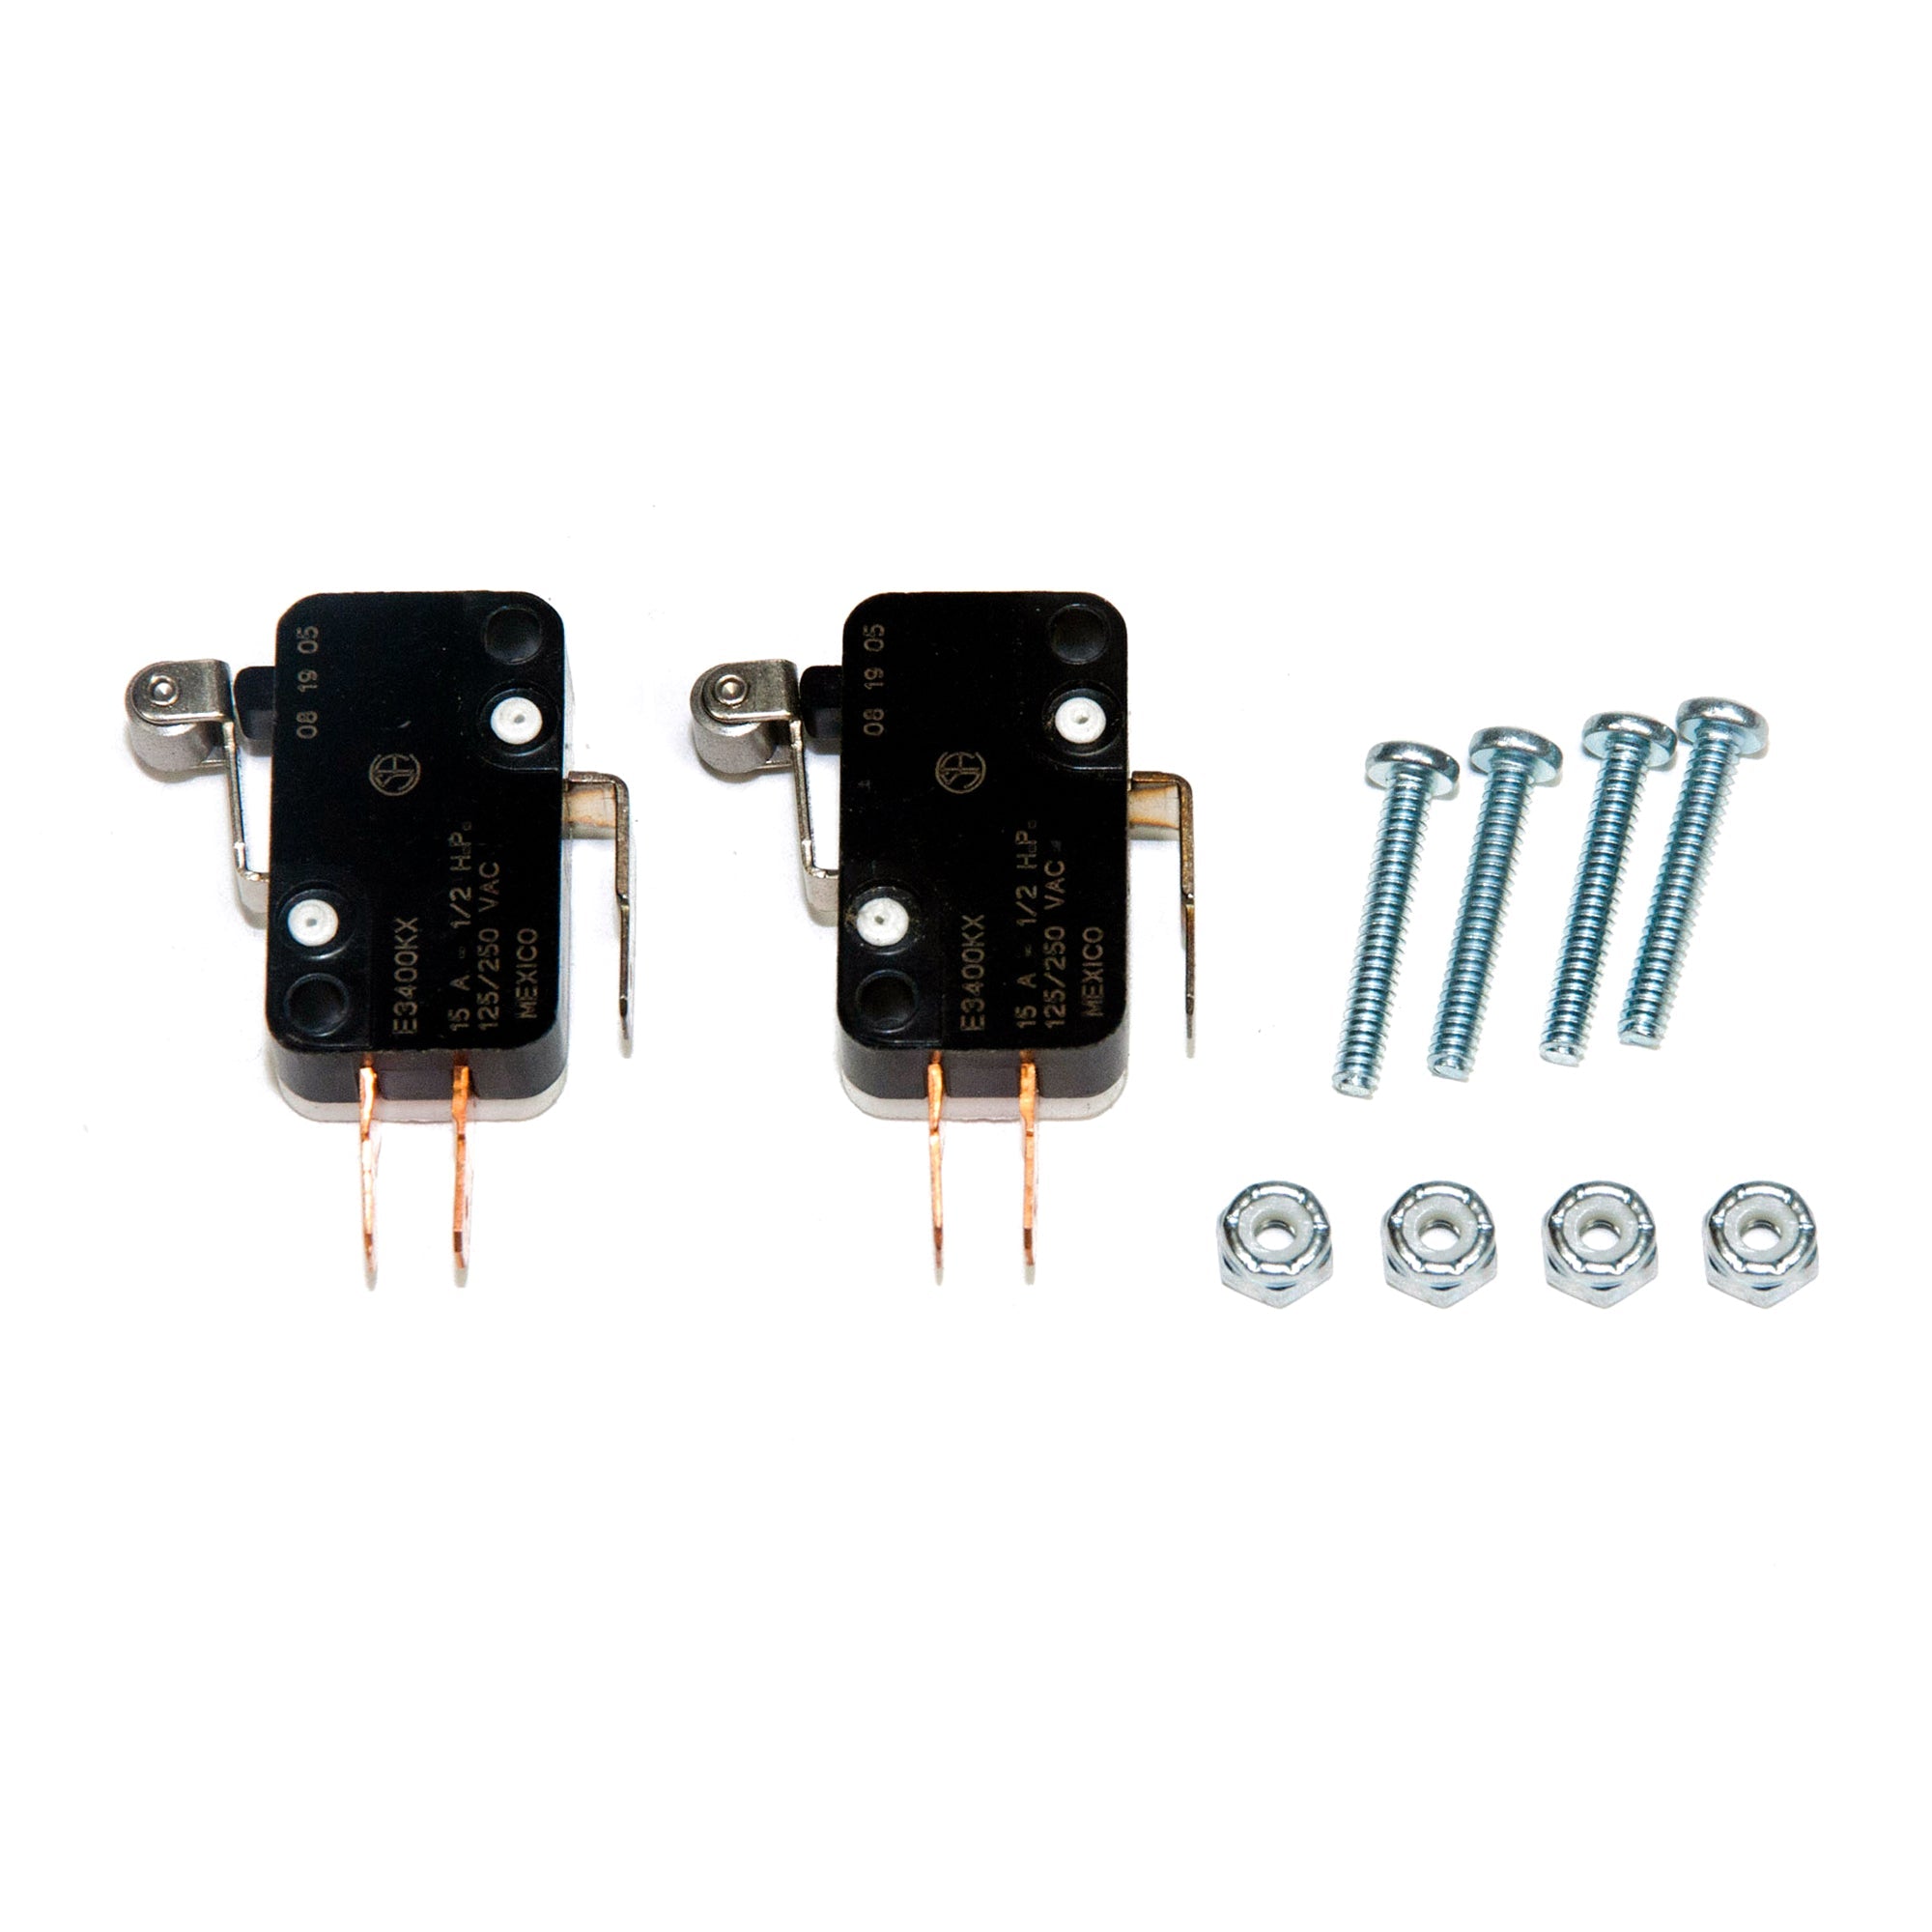 Replacement Limit Switch Kit for DC Slider (R4421) | Mighty Mule Automatic Gate Openers